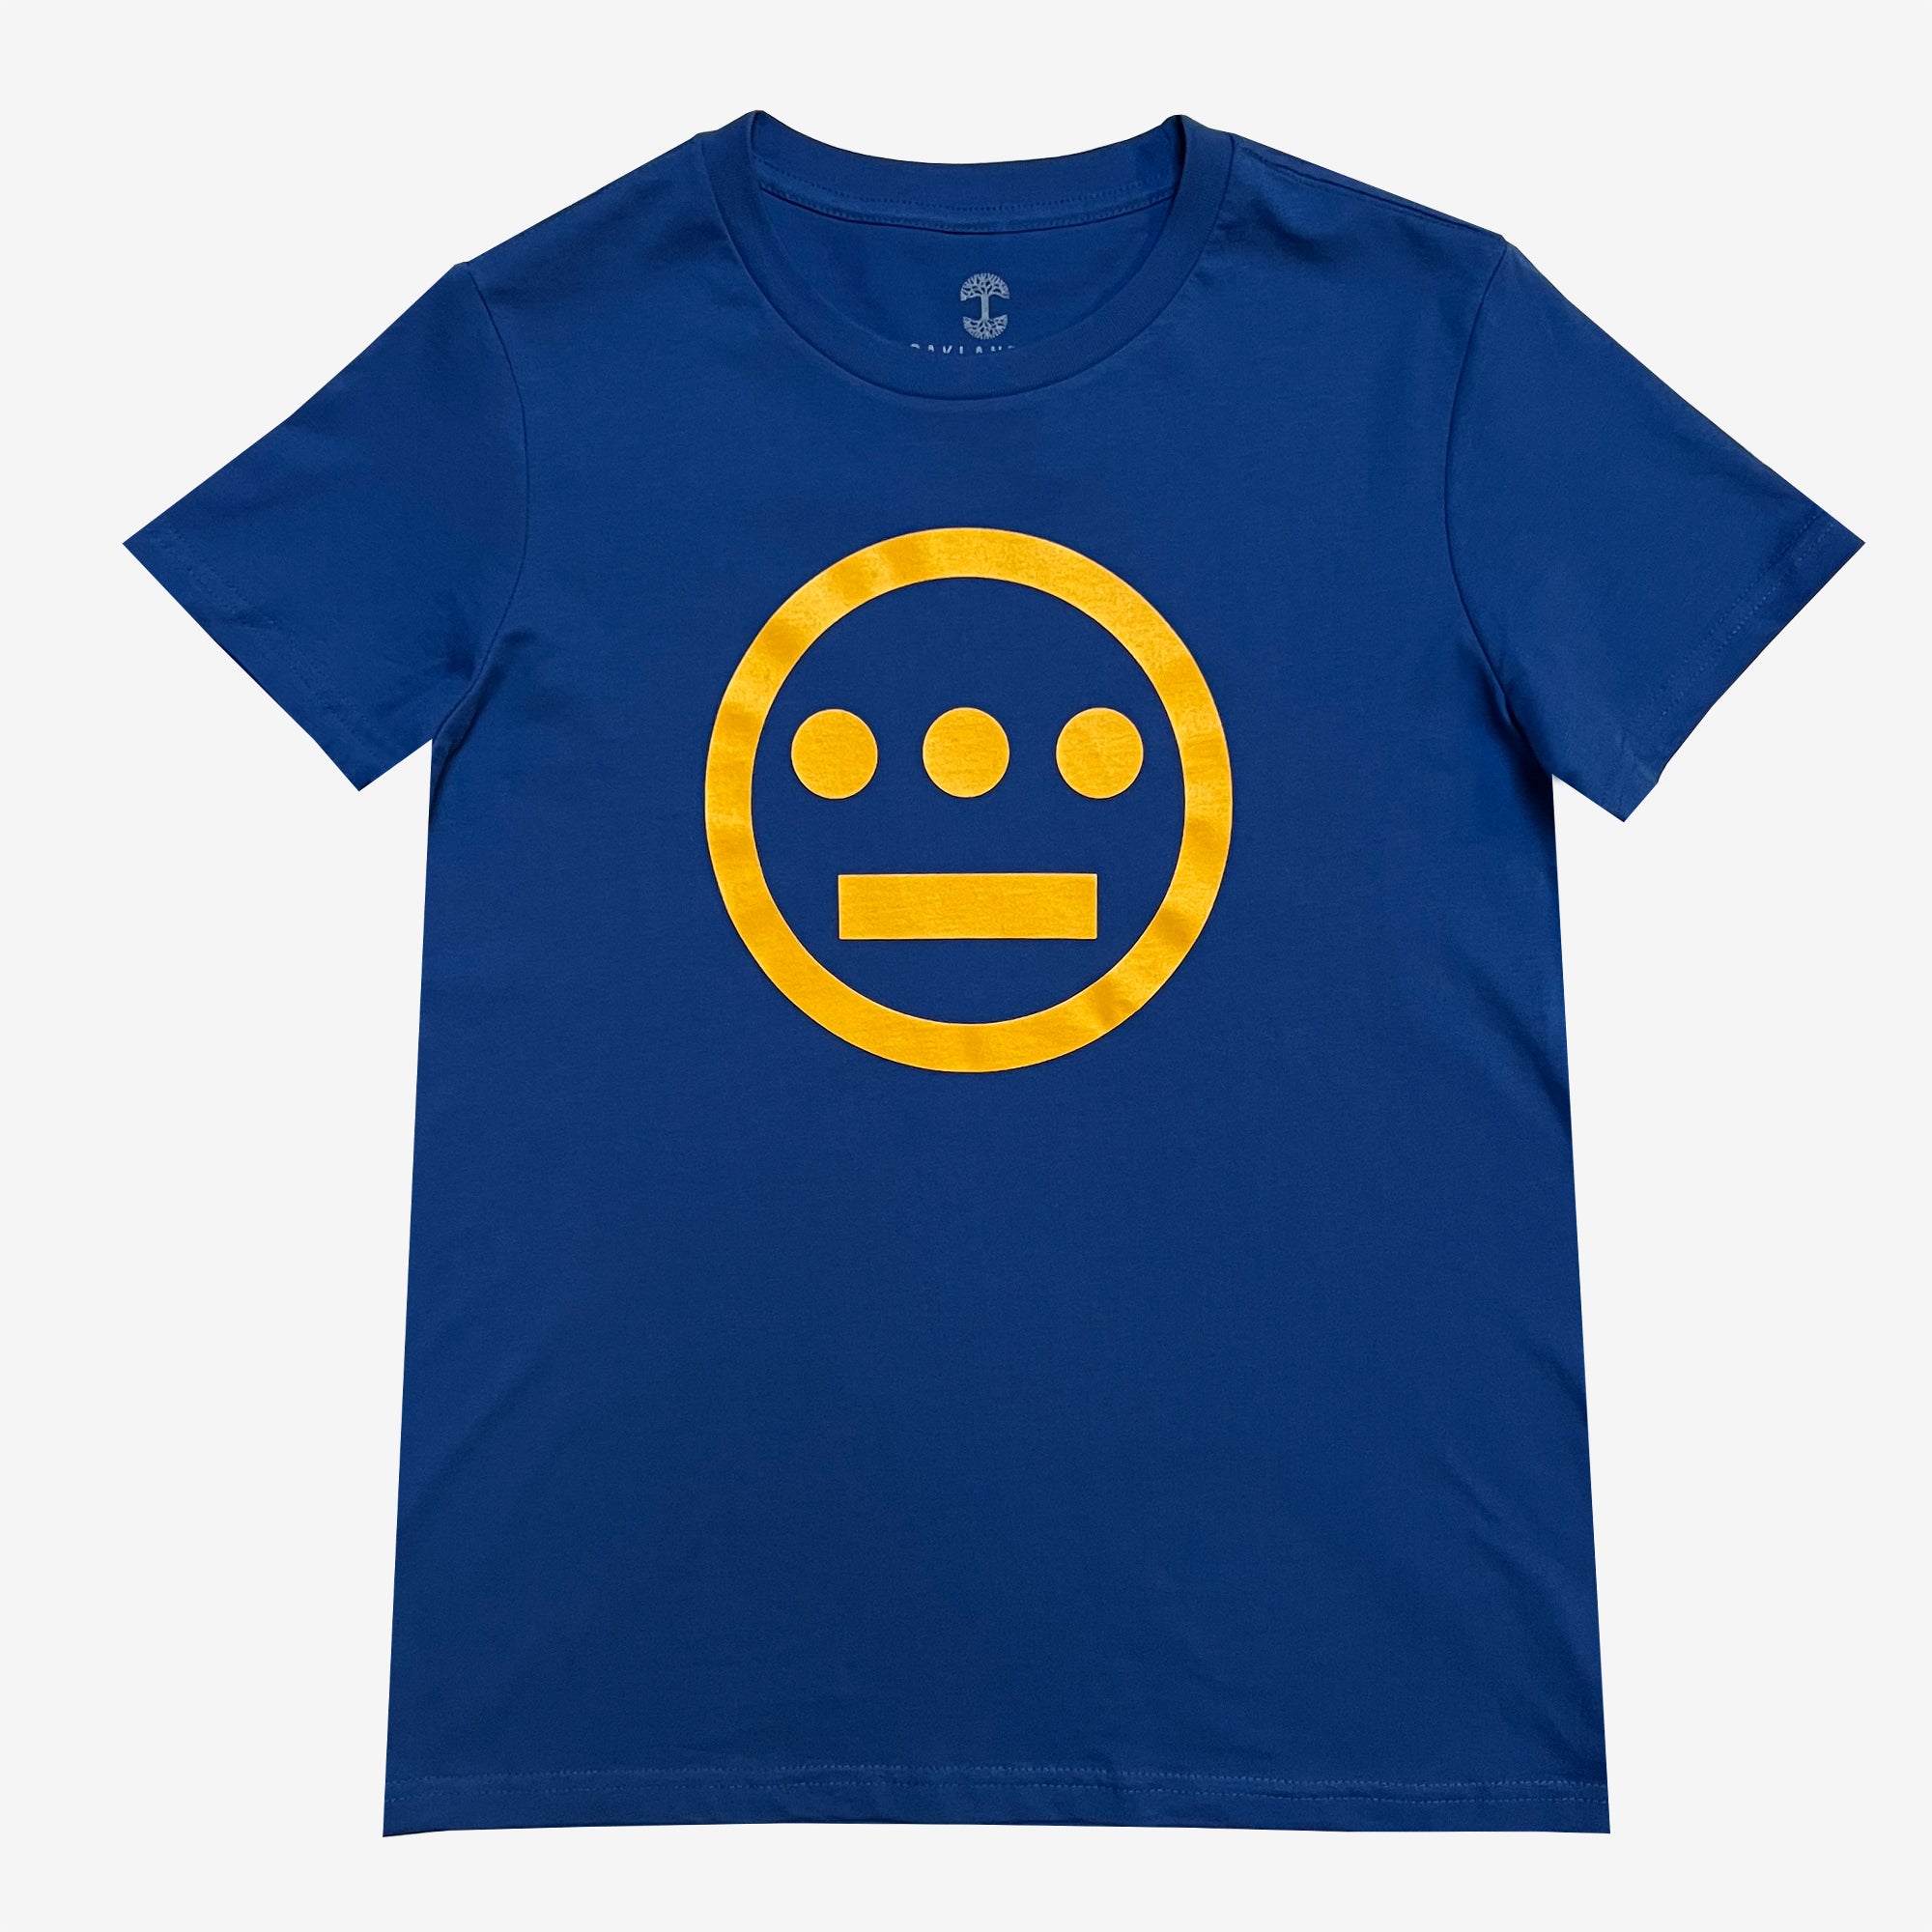 Royal blue t-shirt with yellow Hieroglyphics Hip-Hop logo on center chest. 